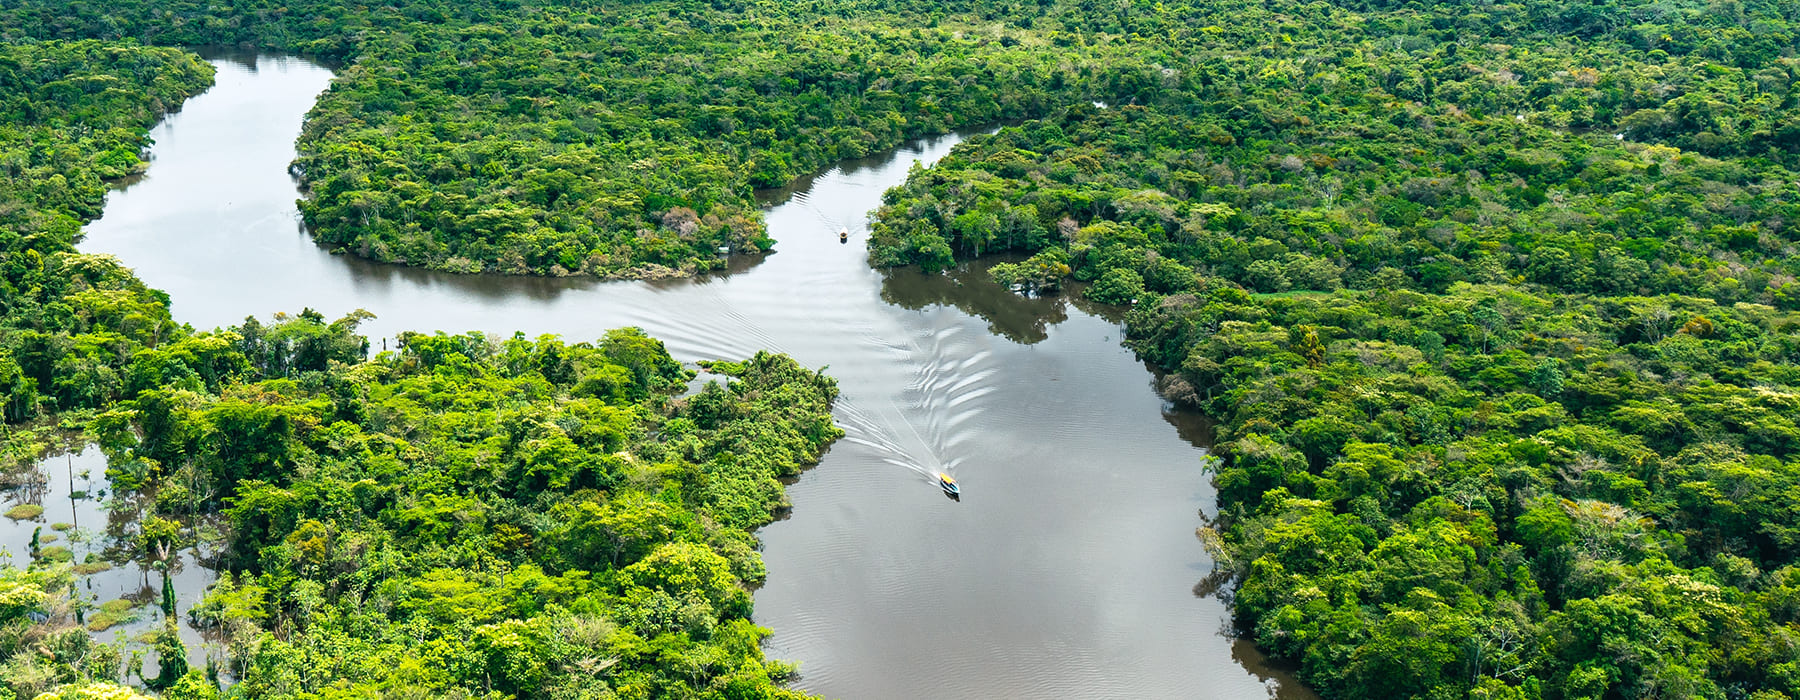 IS MANU NATIONAL PARK LOCATED IN THE AMAZON RAINFOREST?